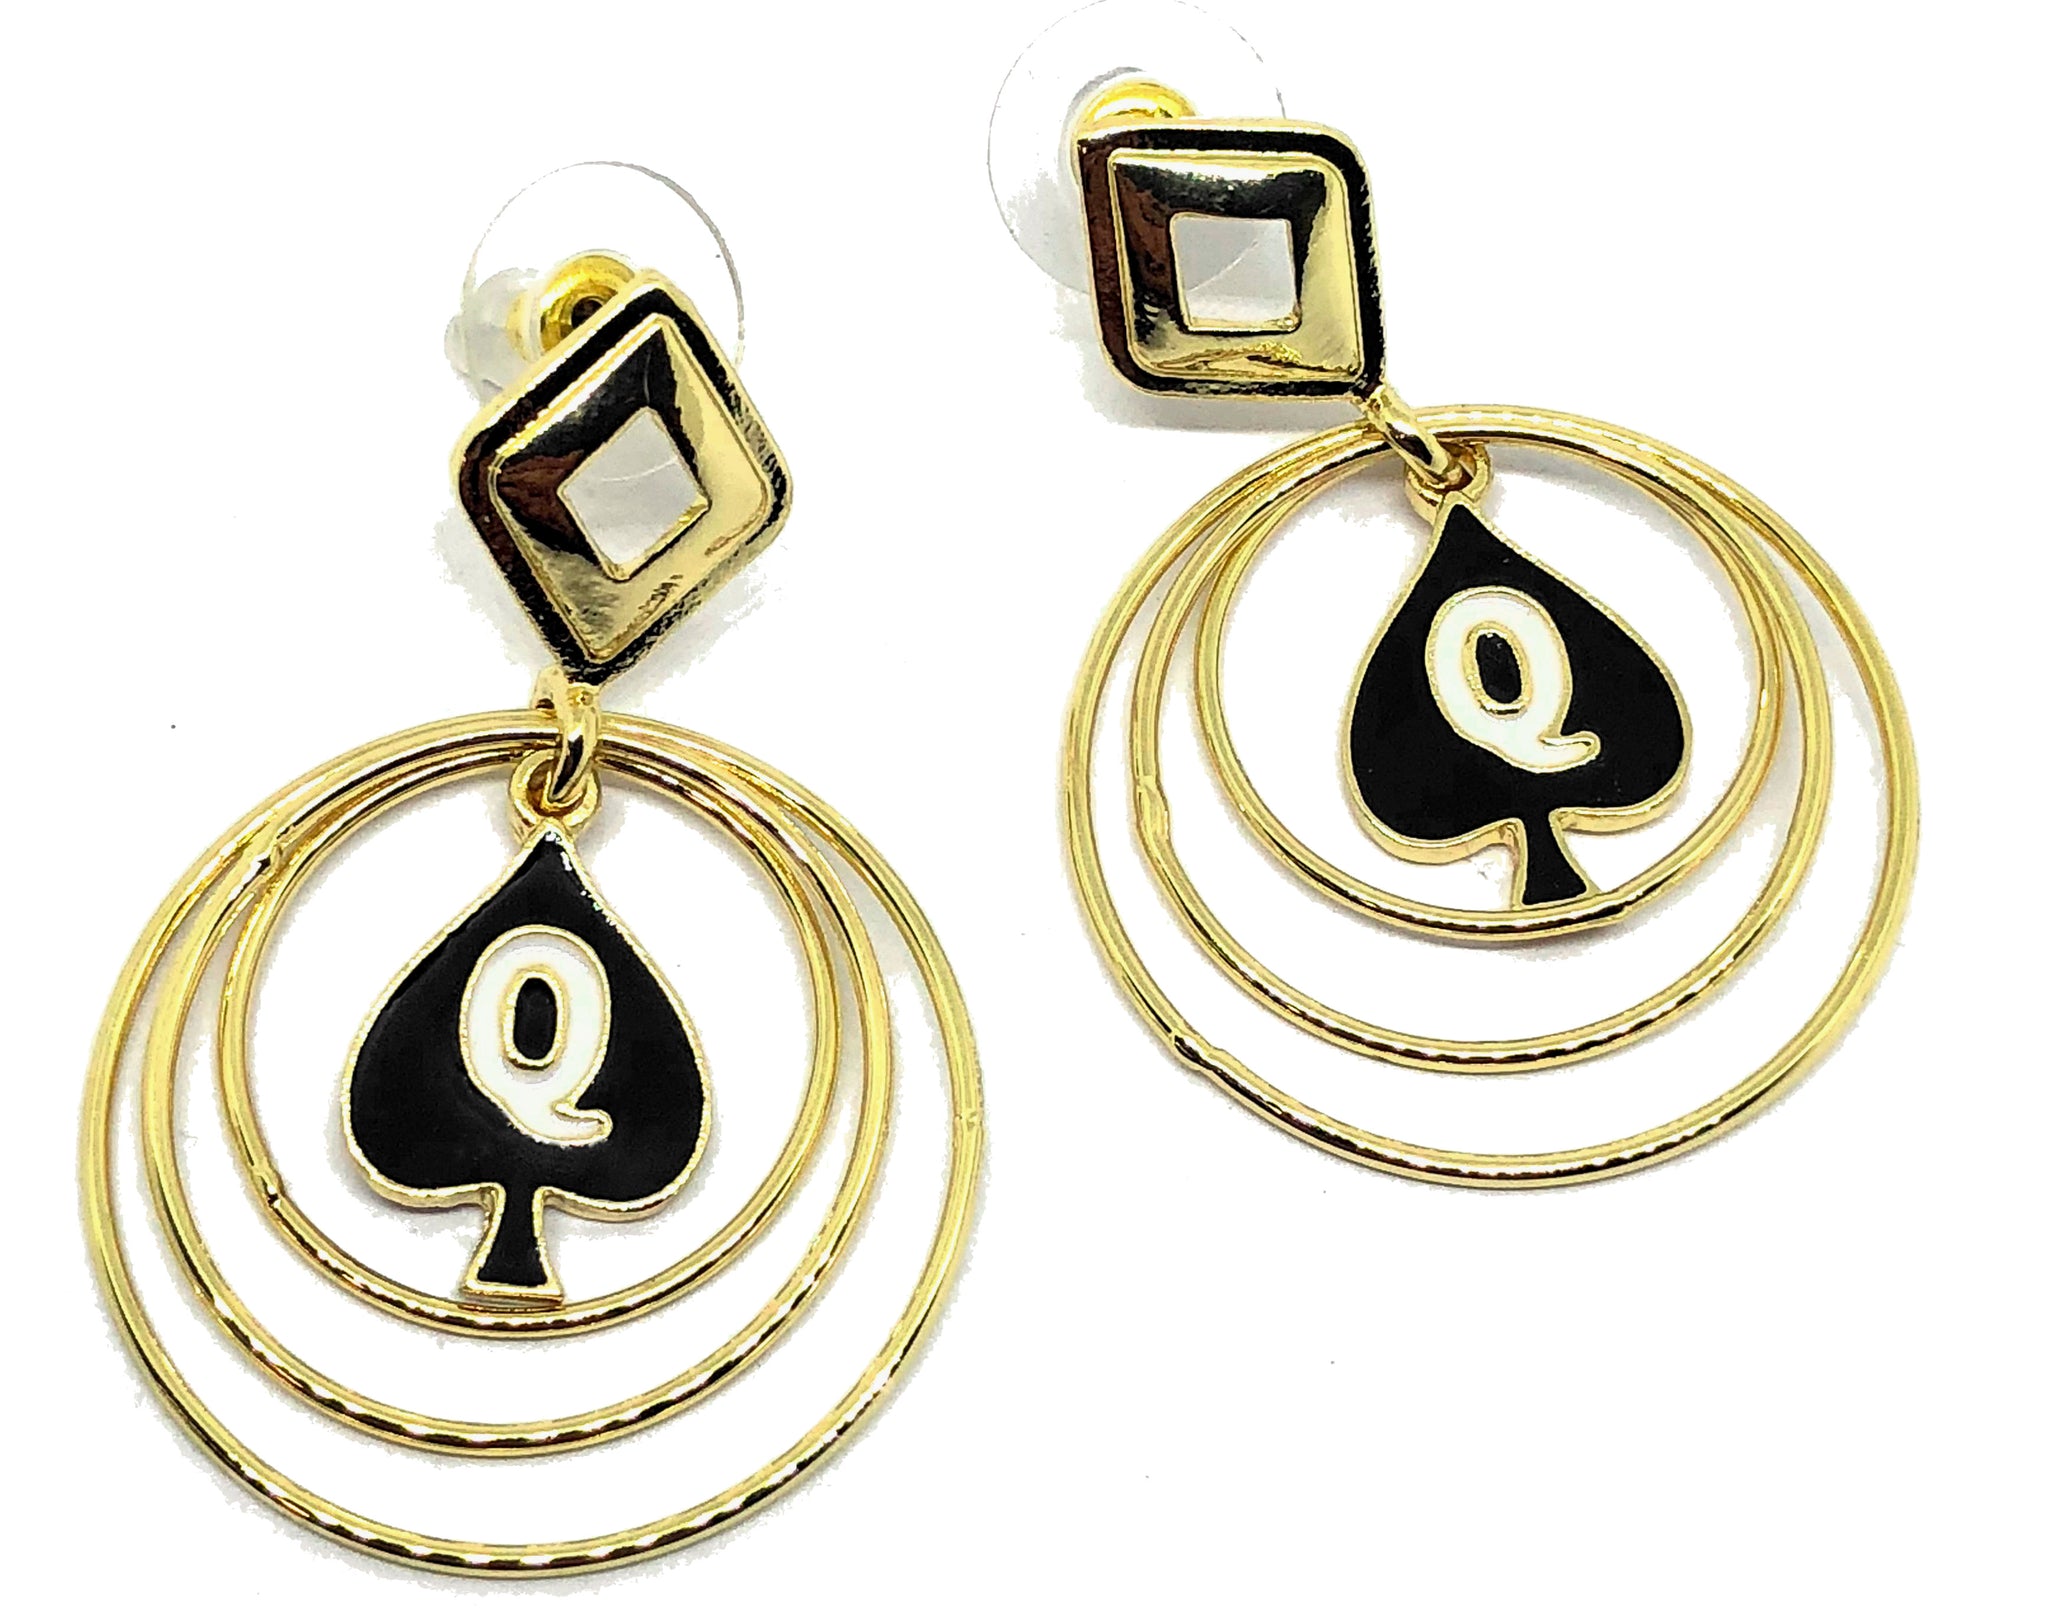 Queen Of Spades - Branded Multi Gold Hoop Earrings for the Hotwife Vixen in you.